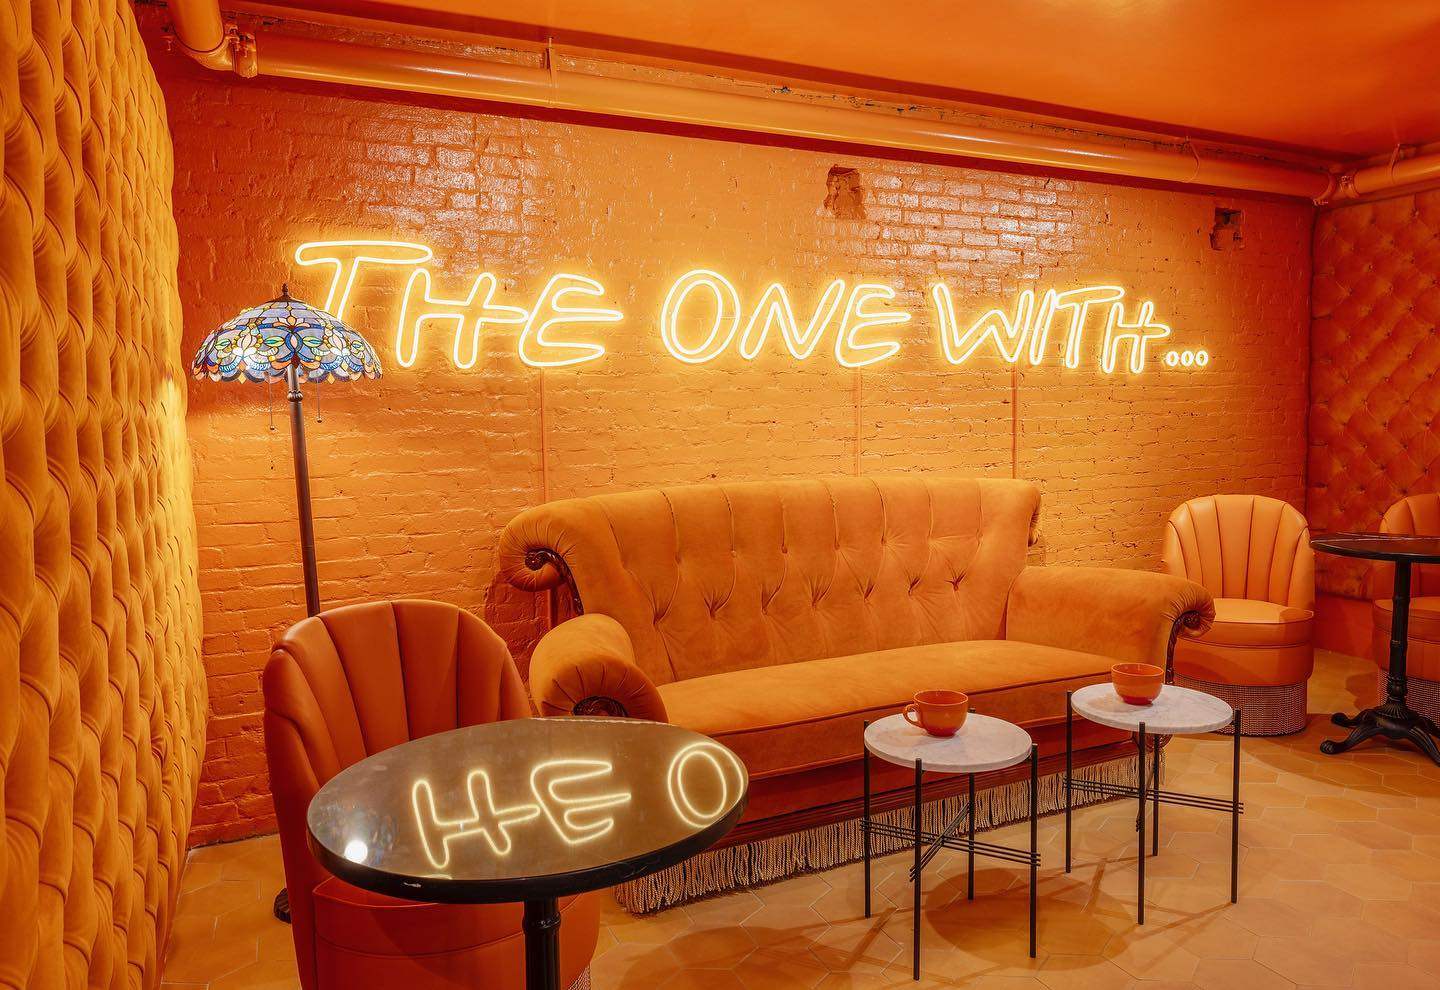 The Central Perk coffee shop in Boston in the United States, a tribute to the “Friends” sitcom whose main characters hung out at Central Perk, has opened, and features a replica of the orange sofa from the long-running show. Instagram / @centralperk 